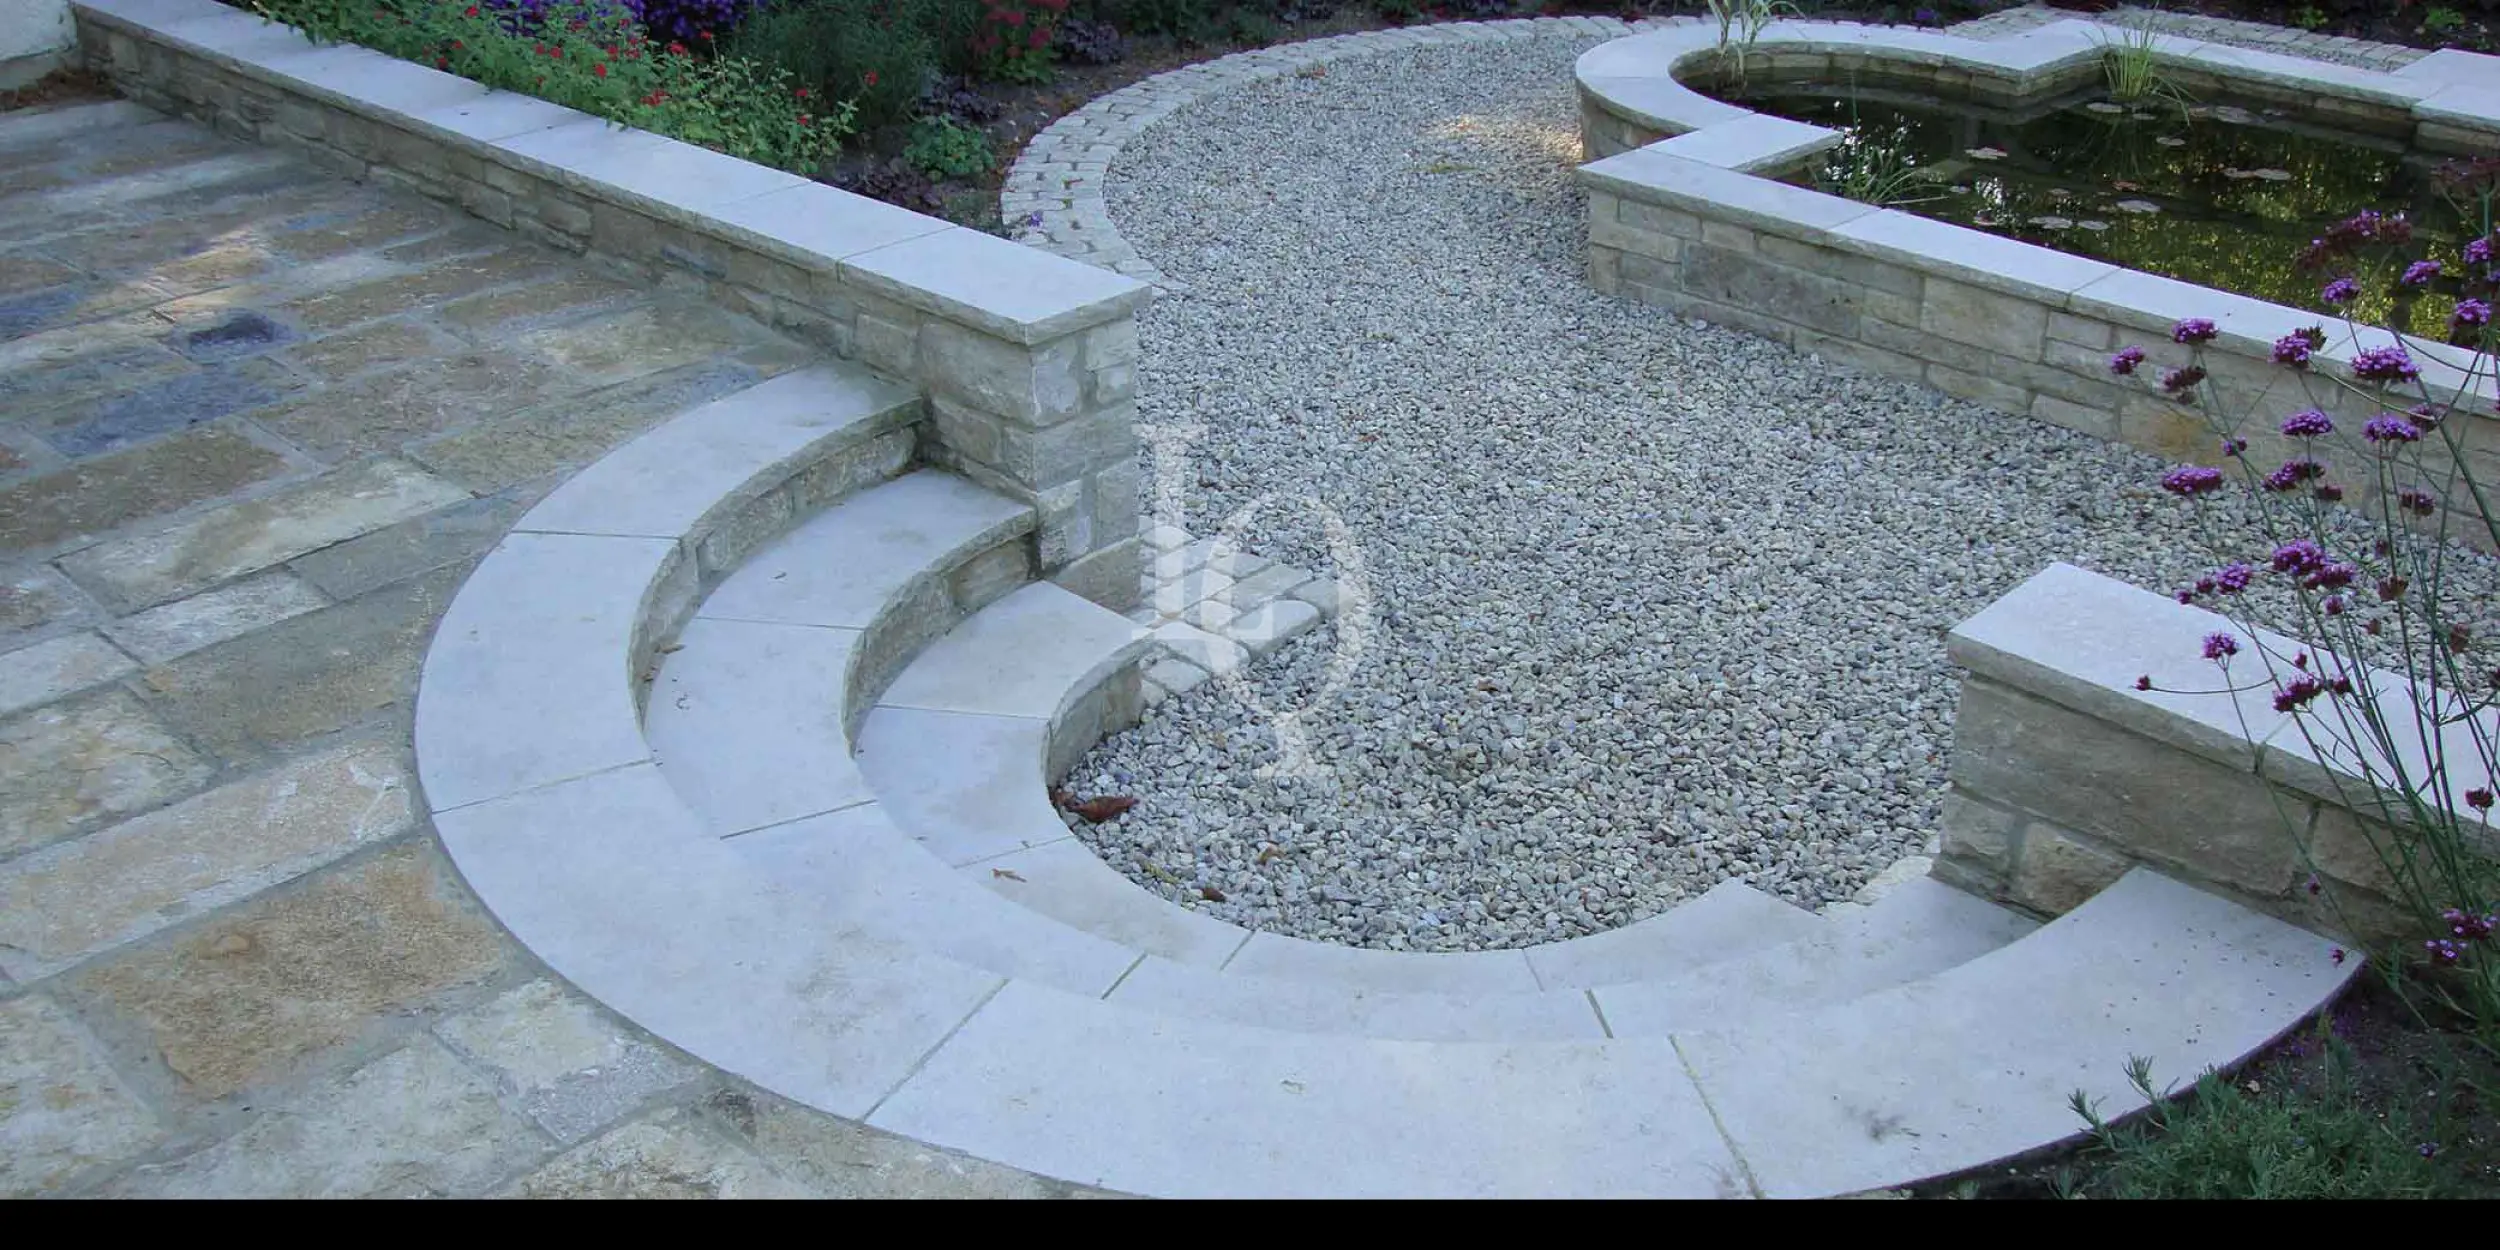 Purbeck limestone curved steps with riven purbeck paving and purbeck chippings